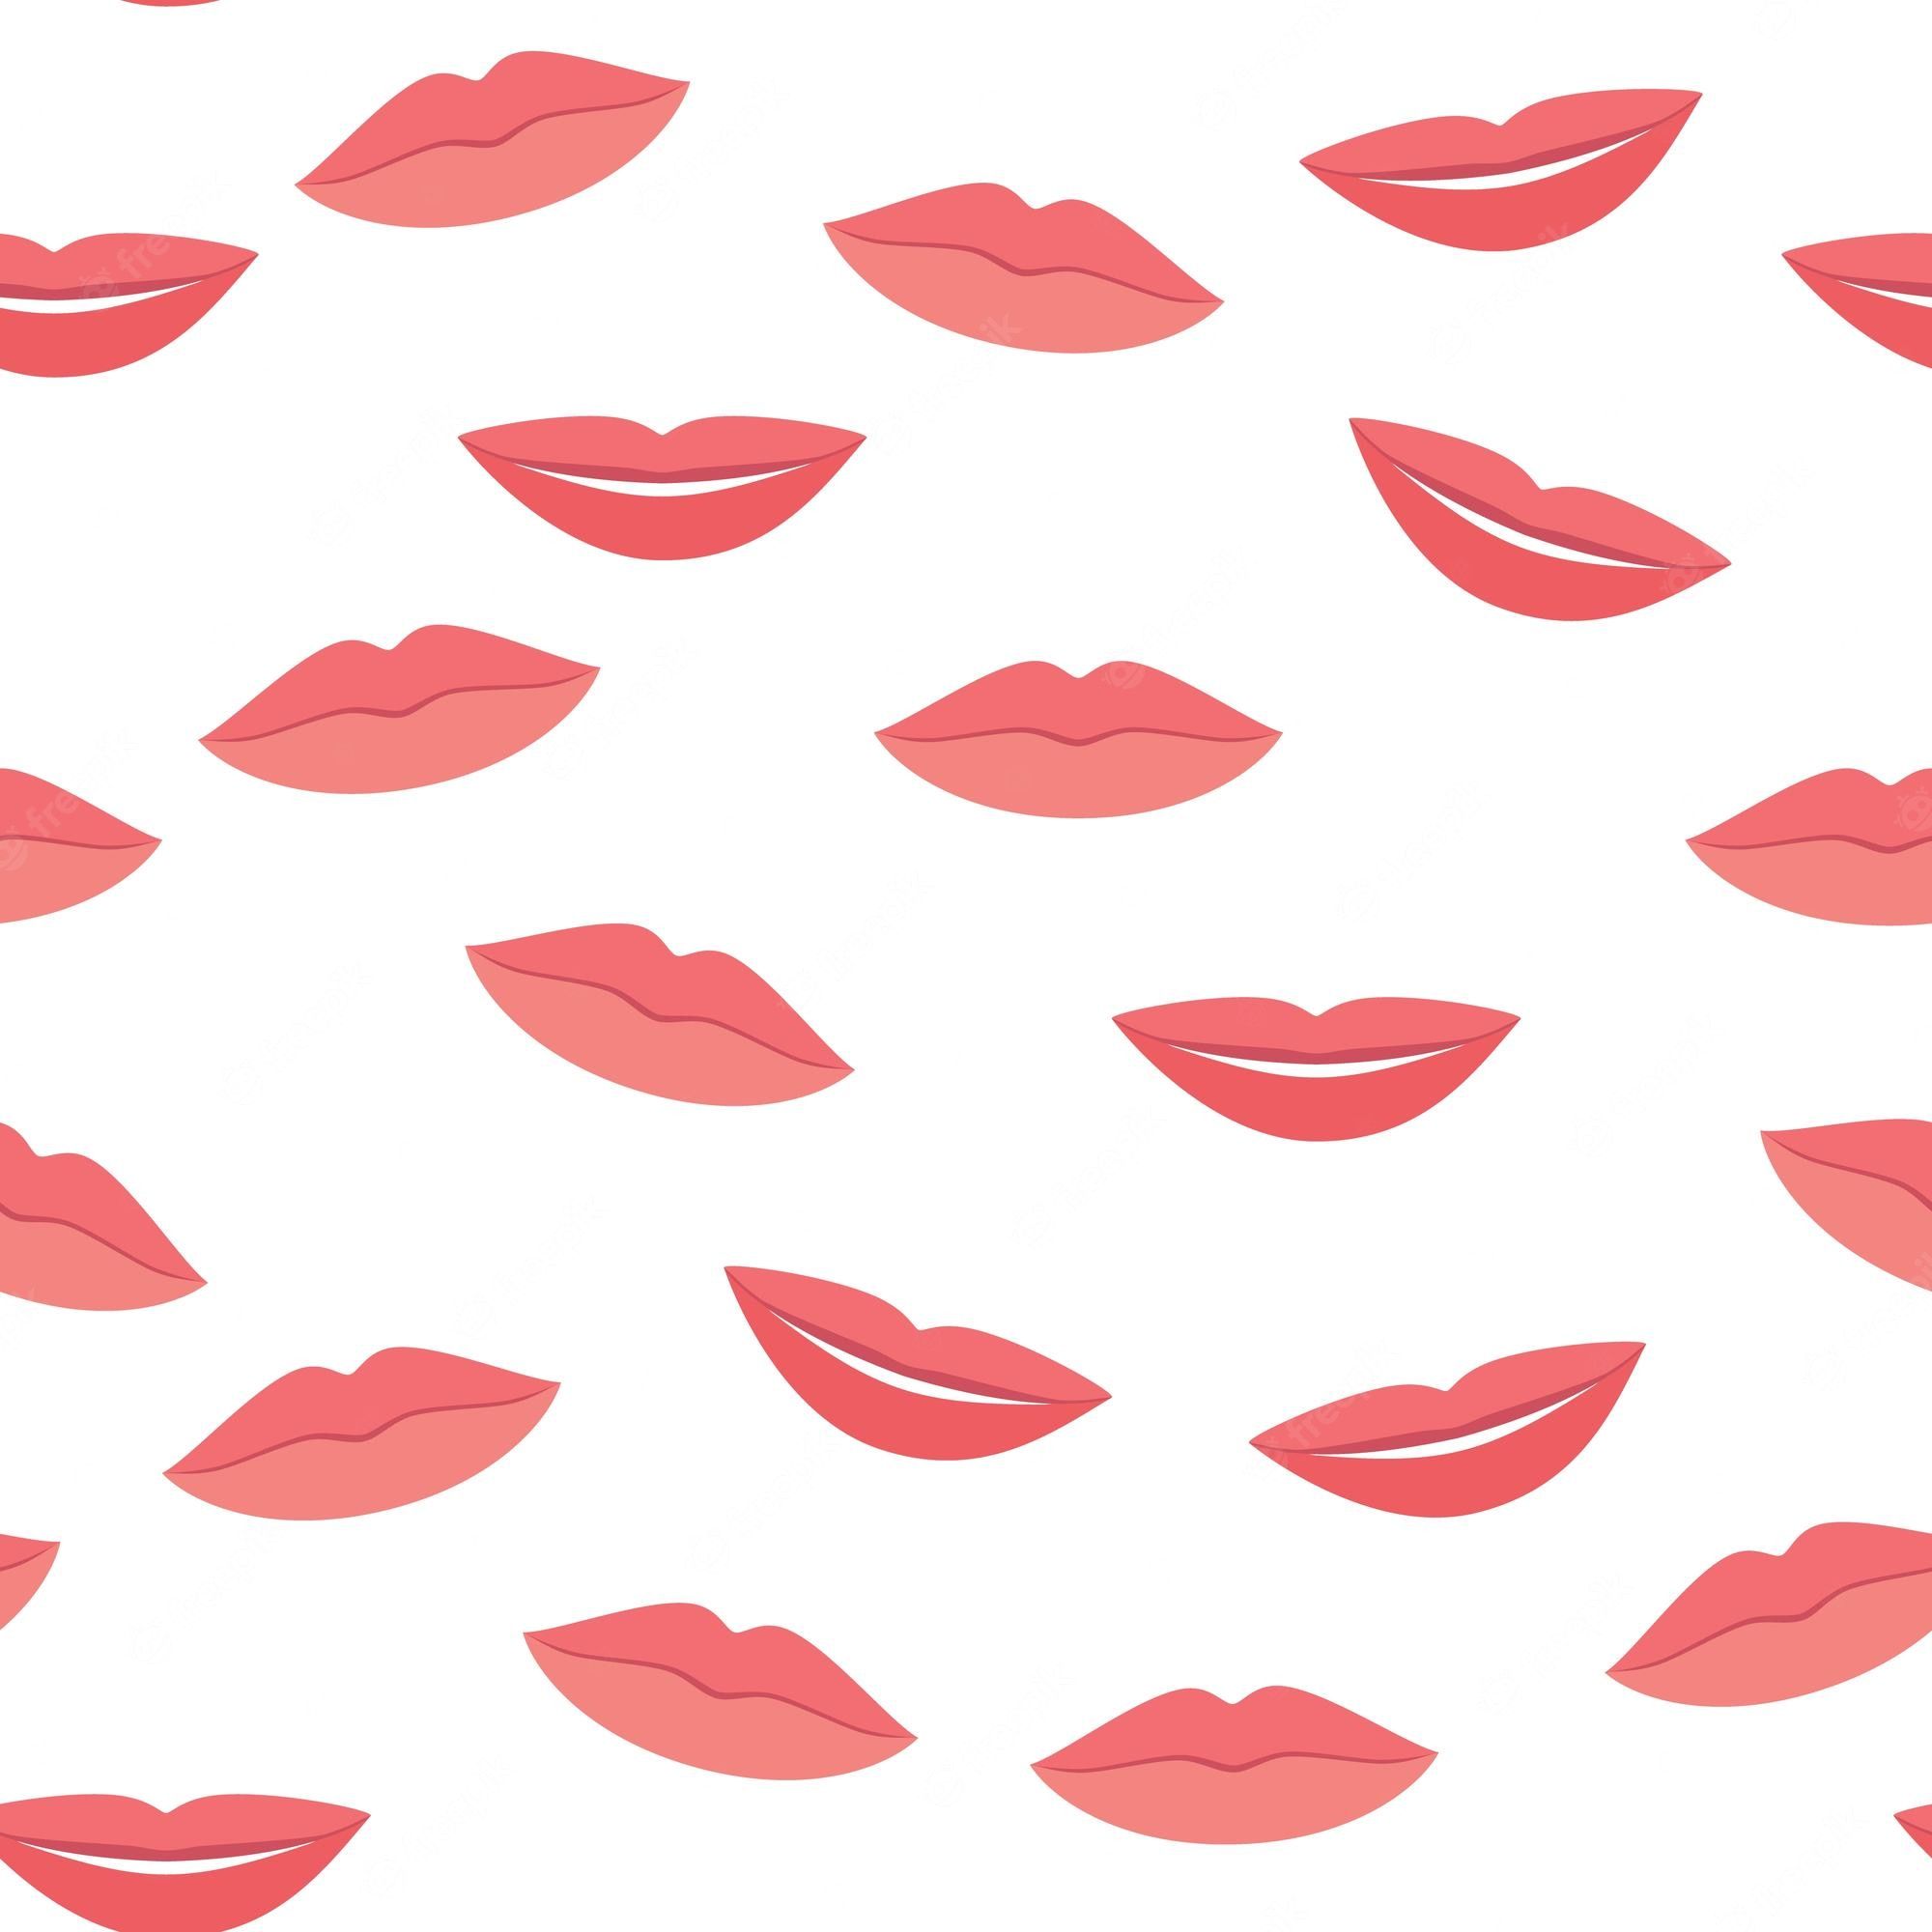 A pattern of lips on white background - Lips